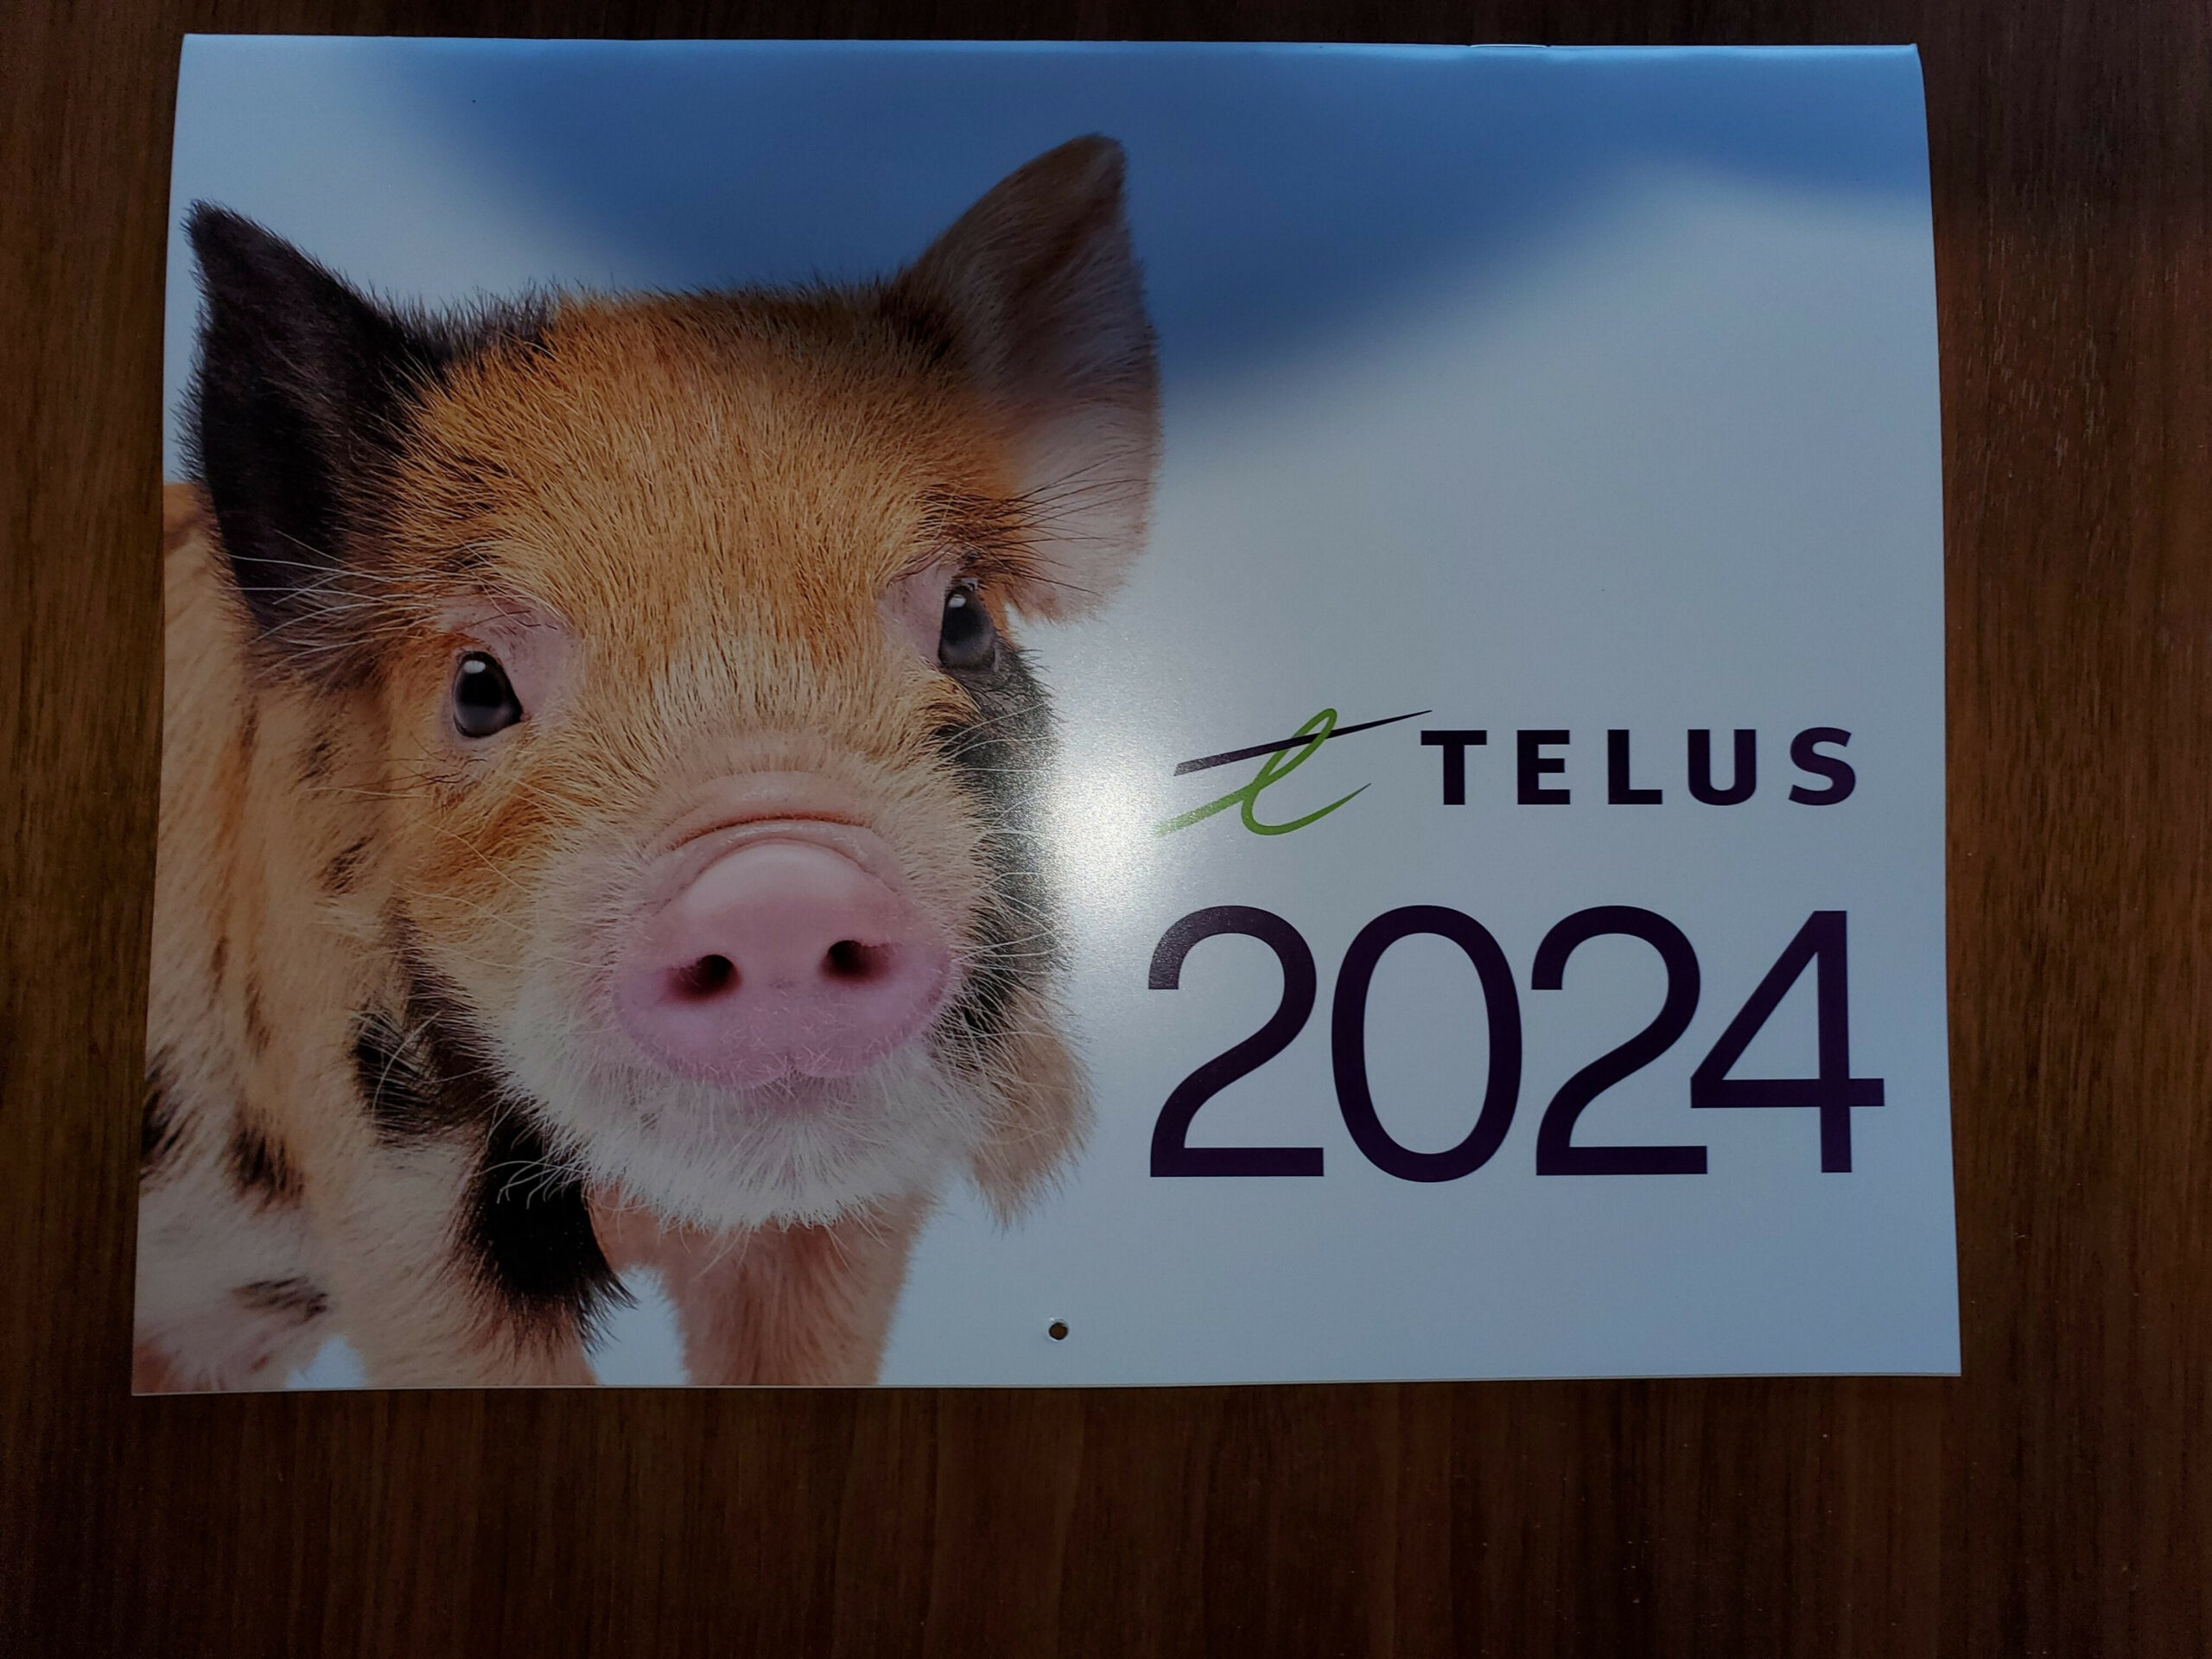 telus calendars are free for telus customers and limited to scaled